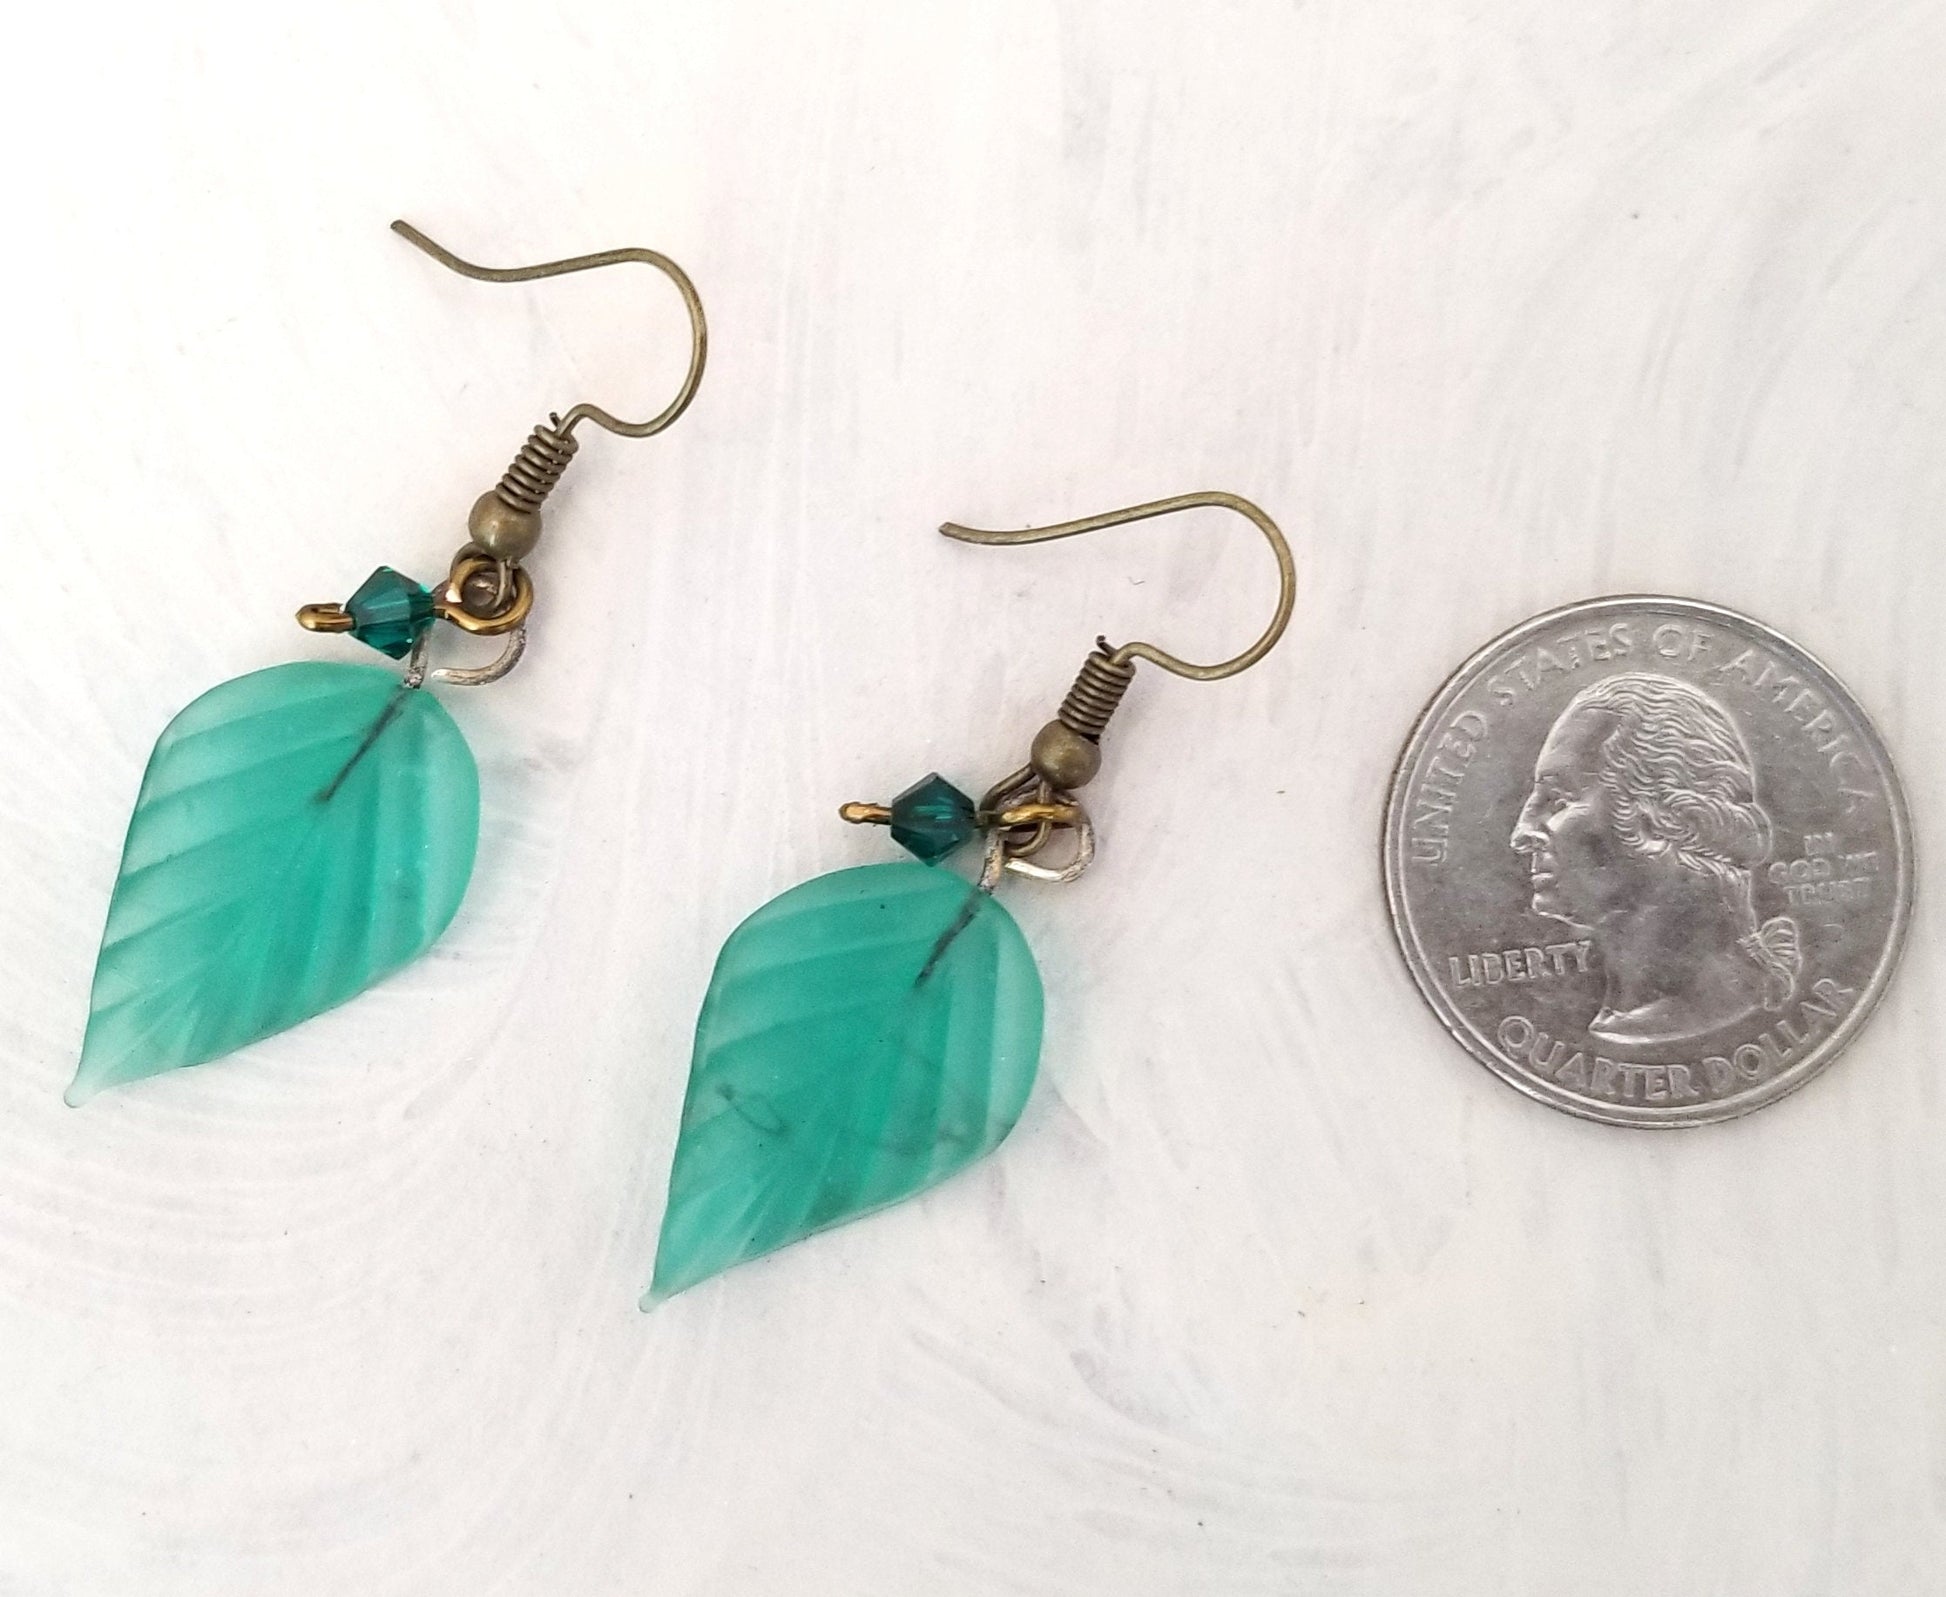 Long Glass Leaf Earrings in Frosted Aqua Sea Blue Green, Wedding, Bridesmaid, Art Nouveau, Renaissance, Forest, Choice of Closure Types